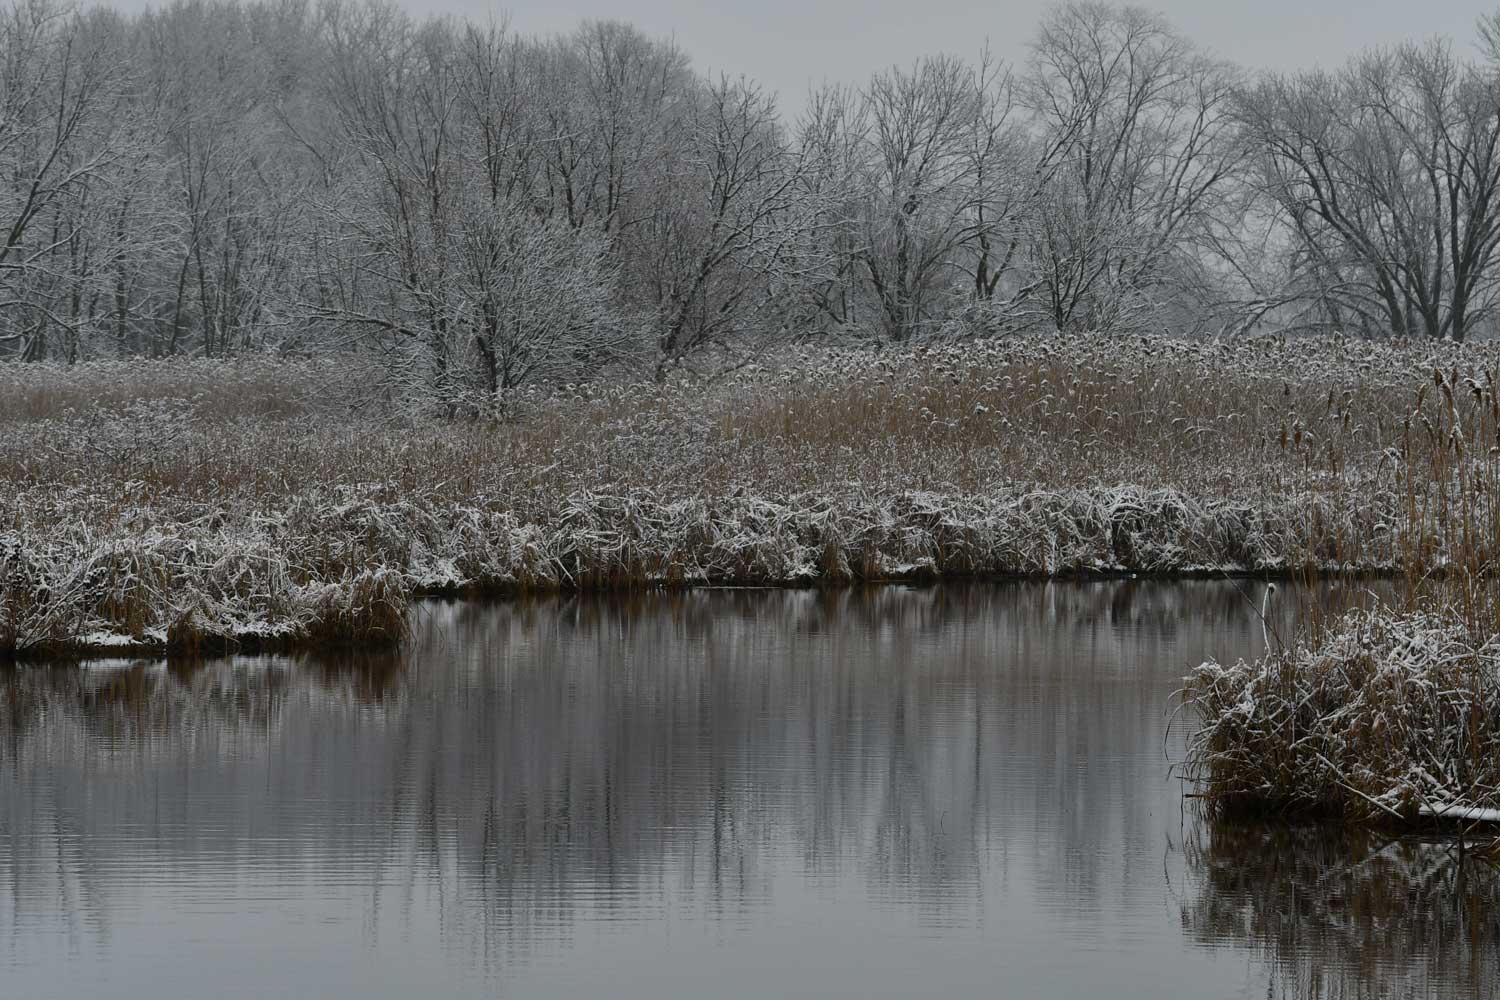 A waterway lined on both sides by dried grasses covered with a light dusting of snow.